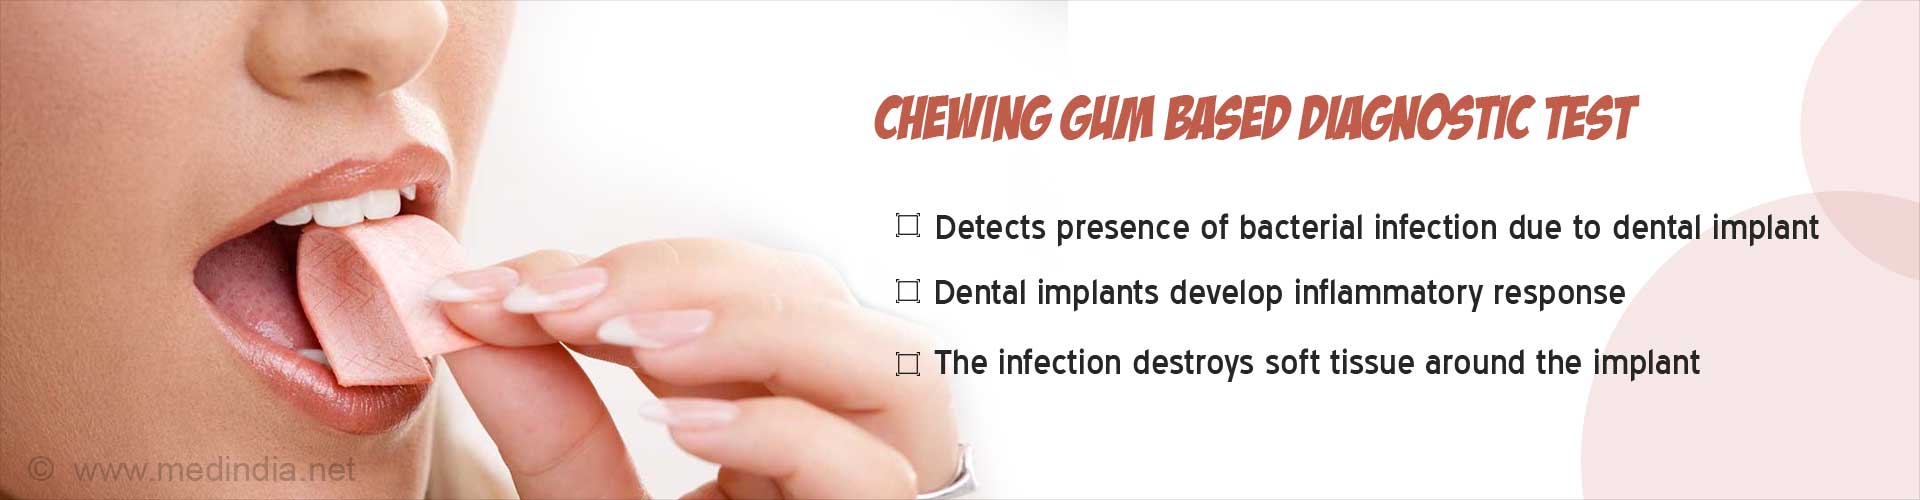 Chewing gum based diagnostic test
- detects presence of bacterial infection due to dental implant
- dental implants develop inflammatory response
- the infection destroys soft tissue around the implant